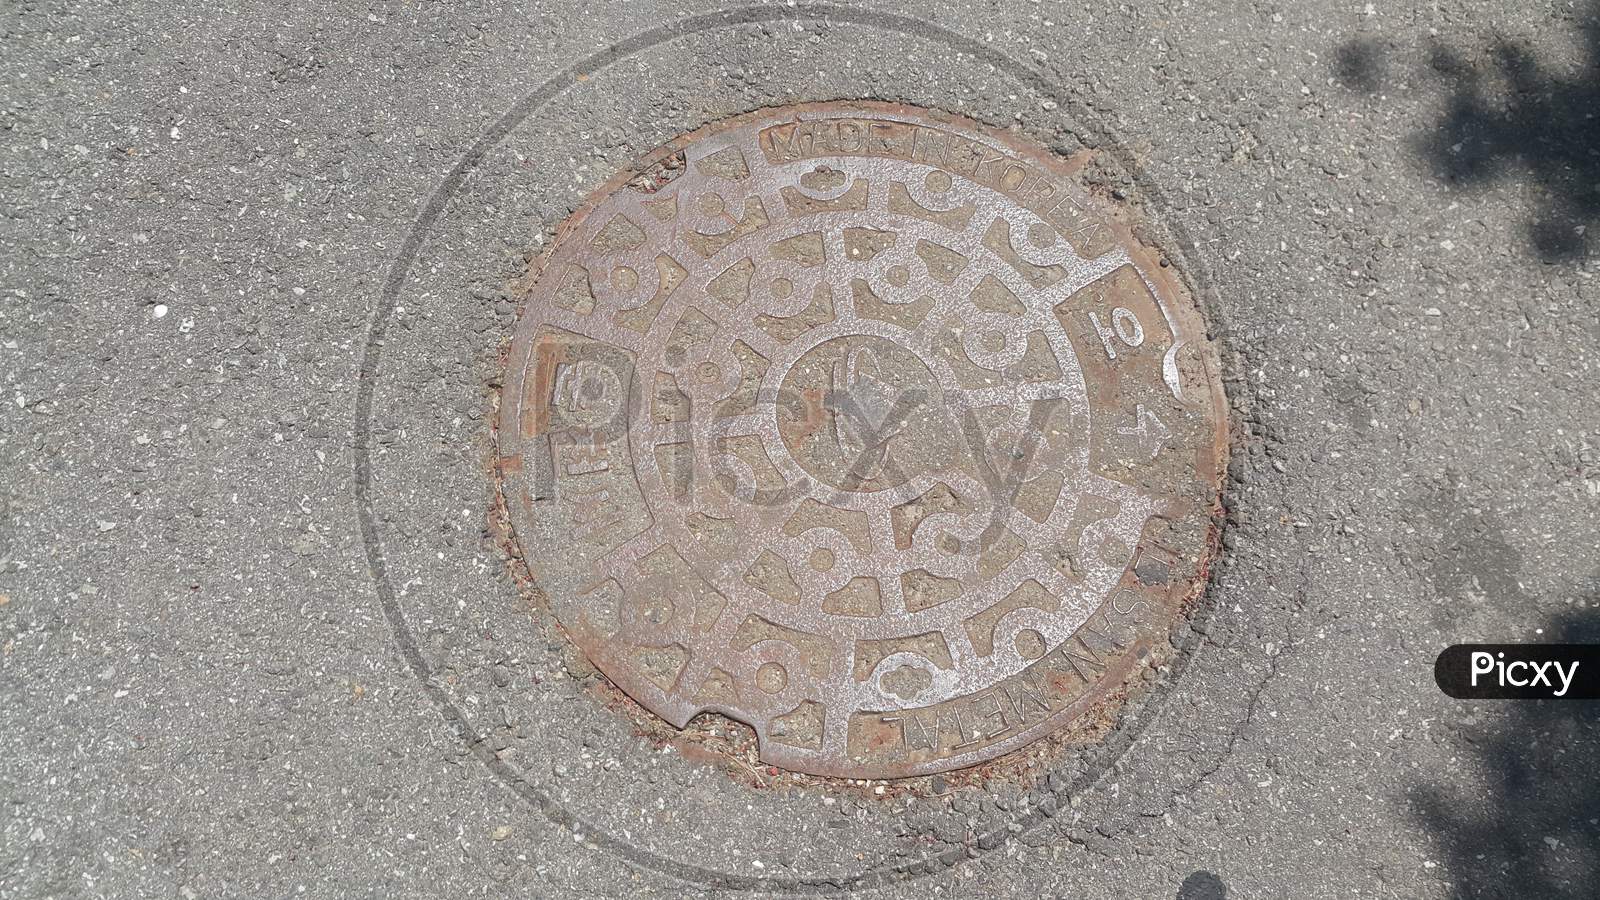 Top View Of A Manhole Cover On Drainage Or Sewerage Under Paved Road.